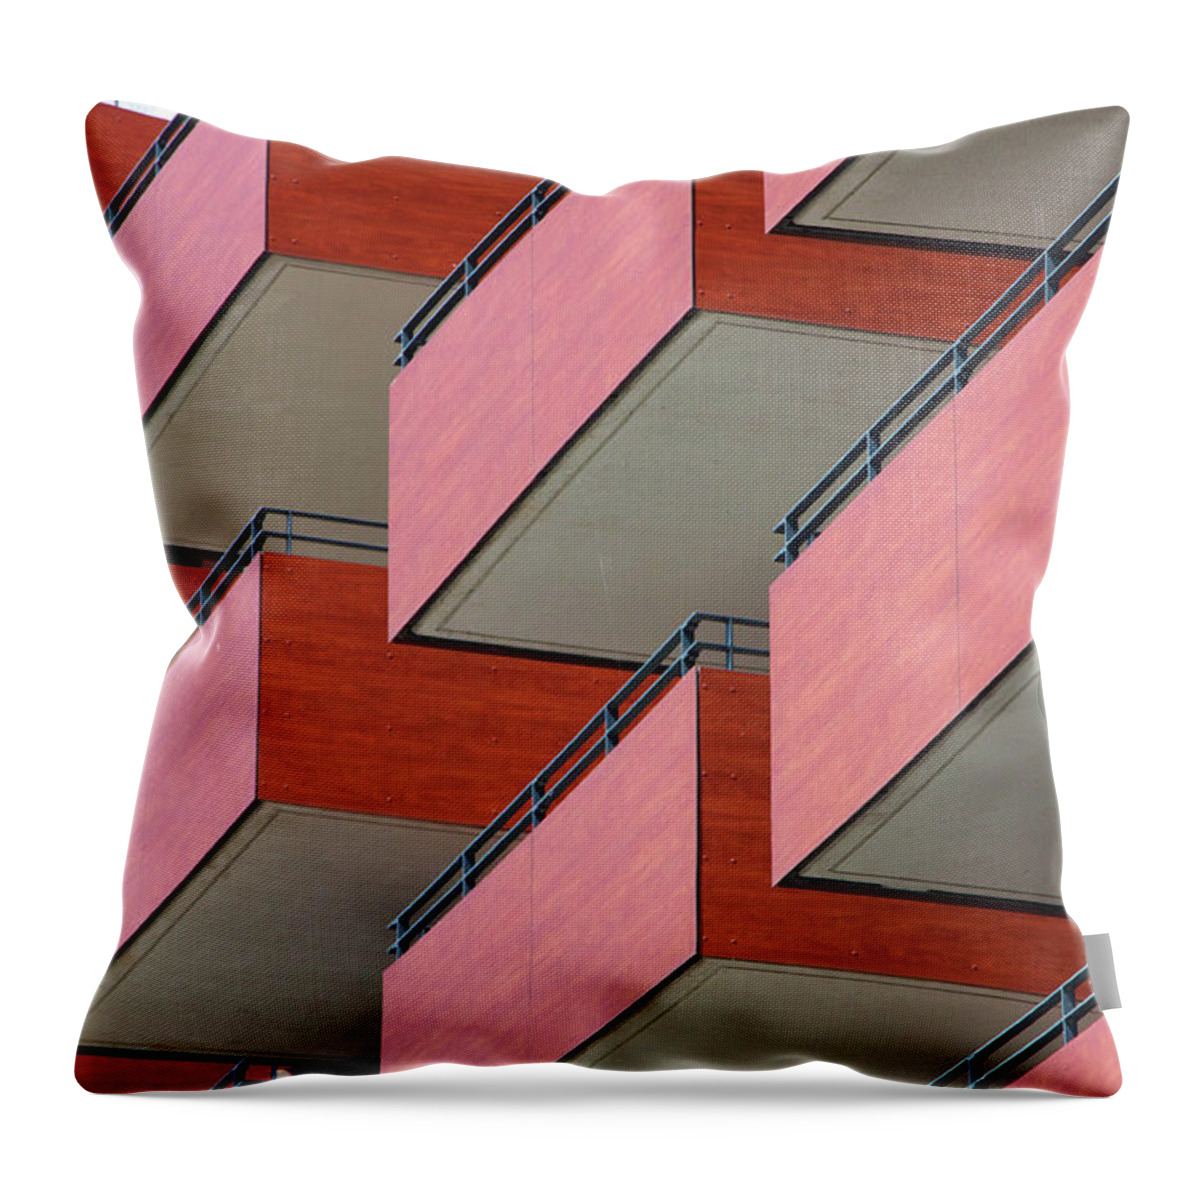 Tranquility Throw Pillow featuring the photograph Red Balconies by Jannis Werner